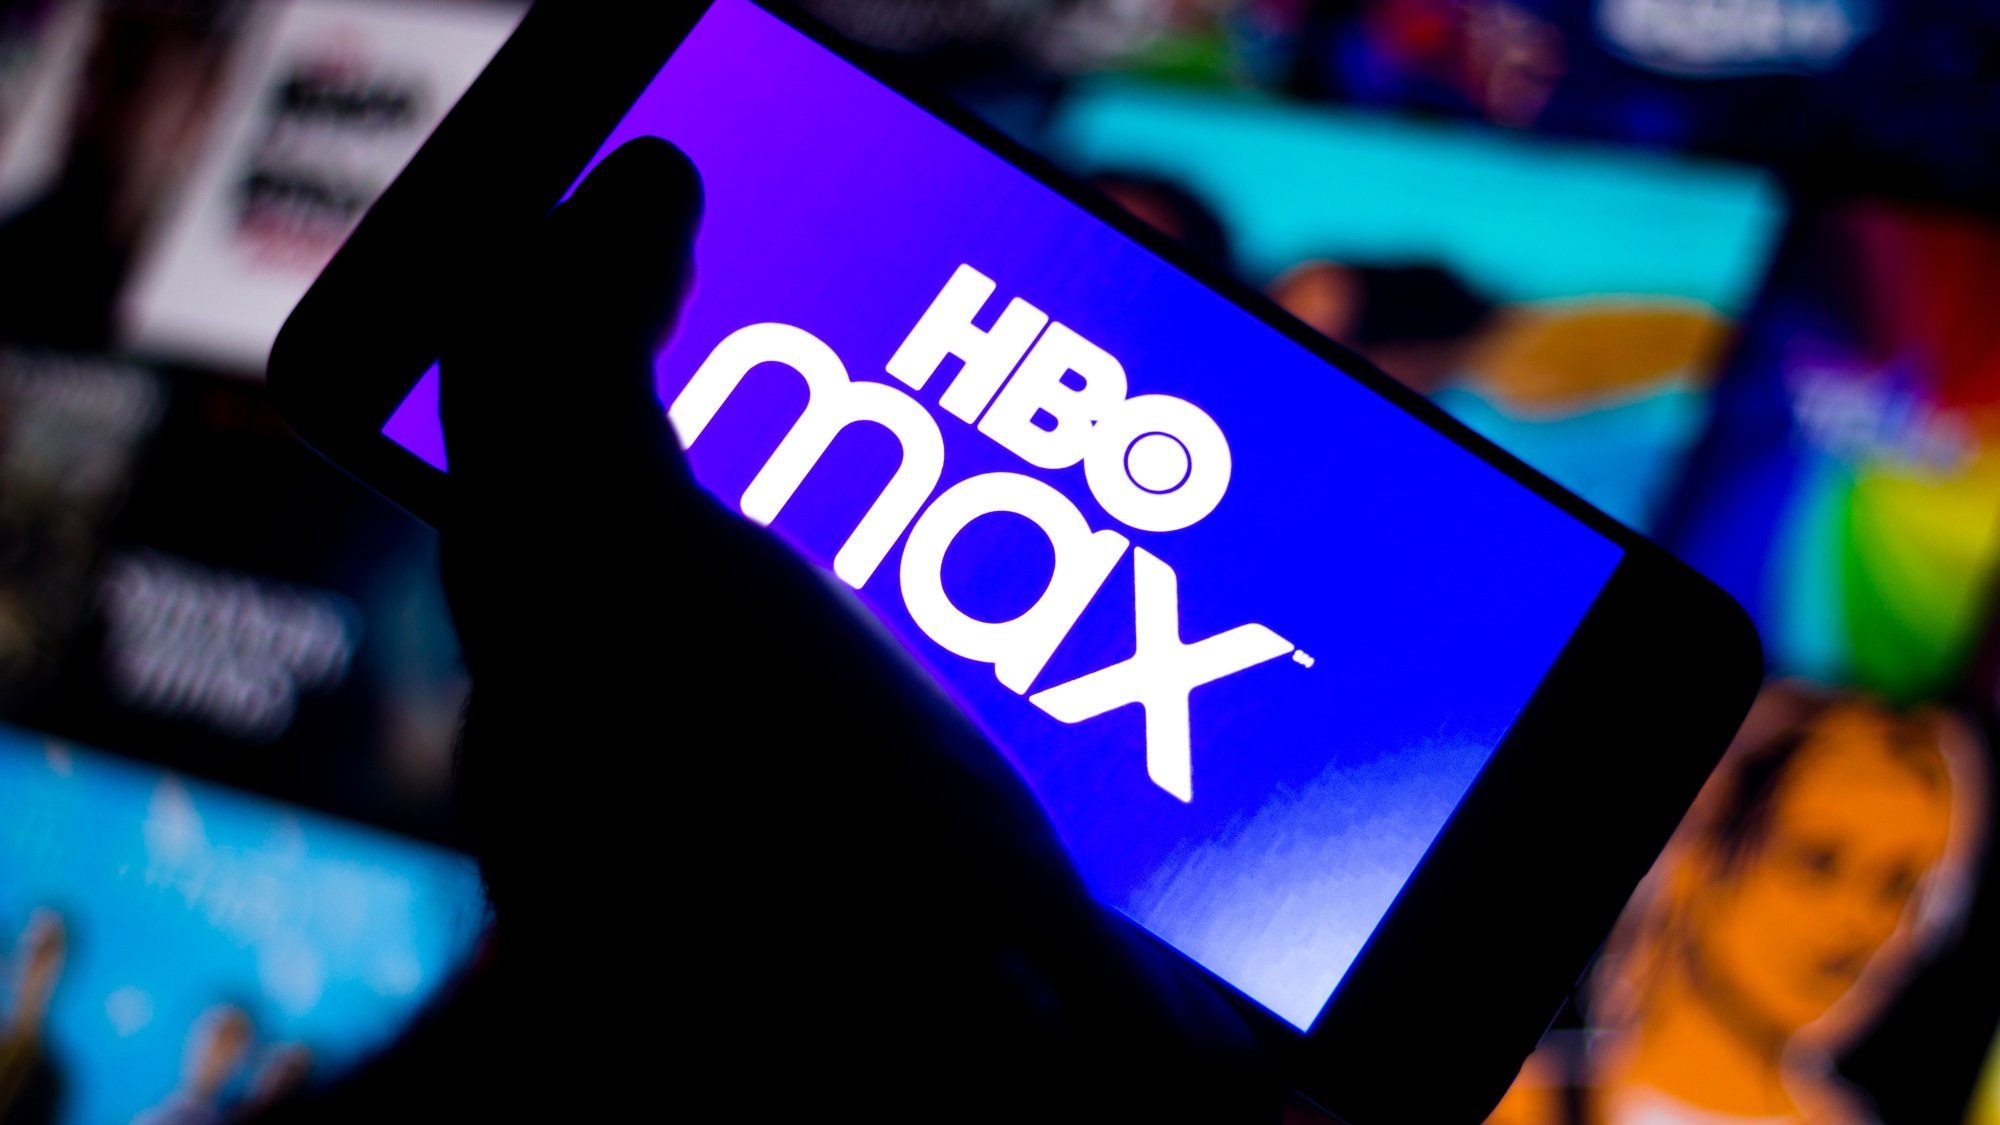 Cancel HBO Max Subscription